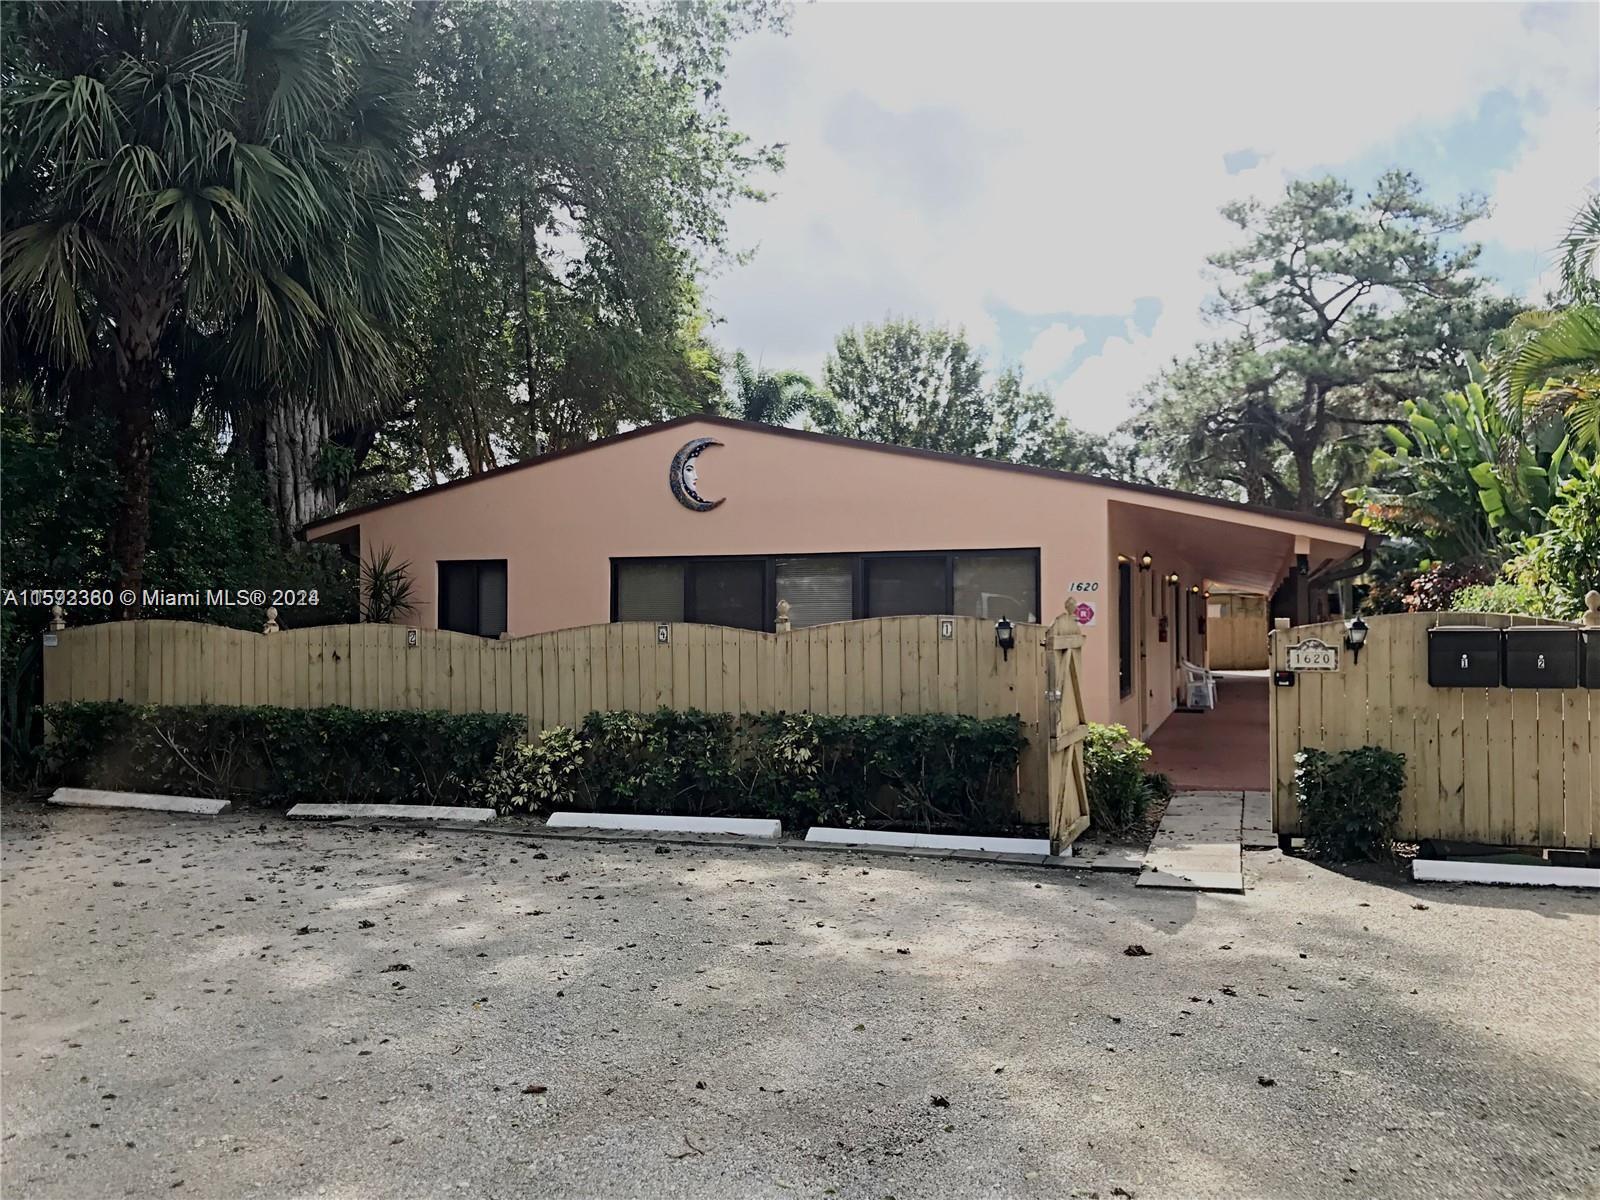 Rental Property at 1620 Sw 25th St St, Fort Lauderdale, Broward County, Florida -  - $950,000 MO.